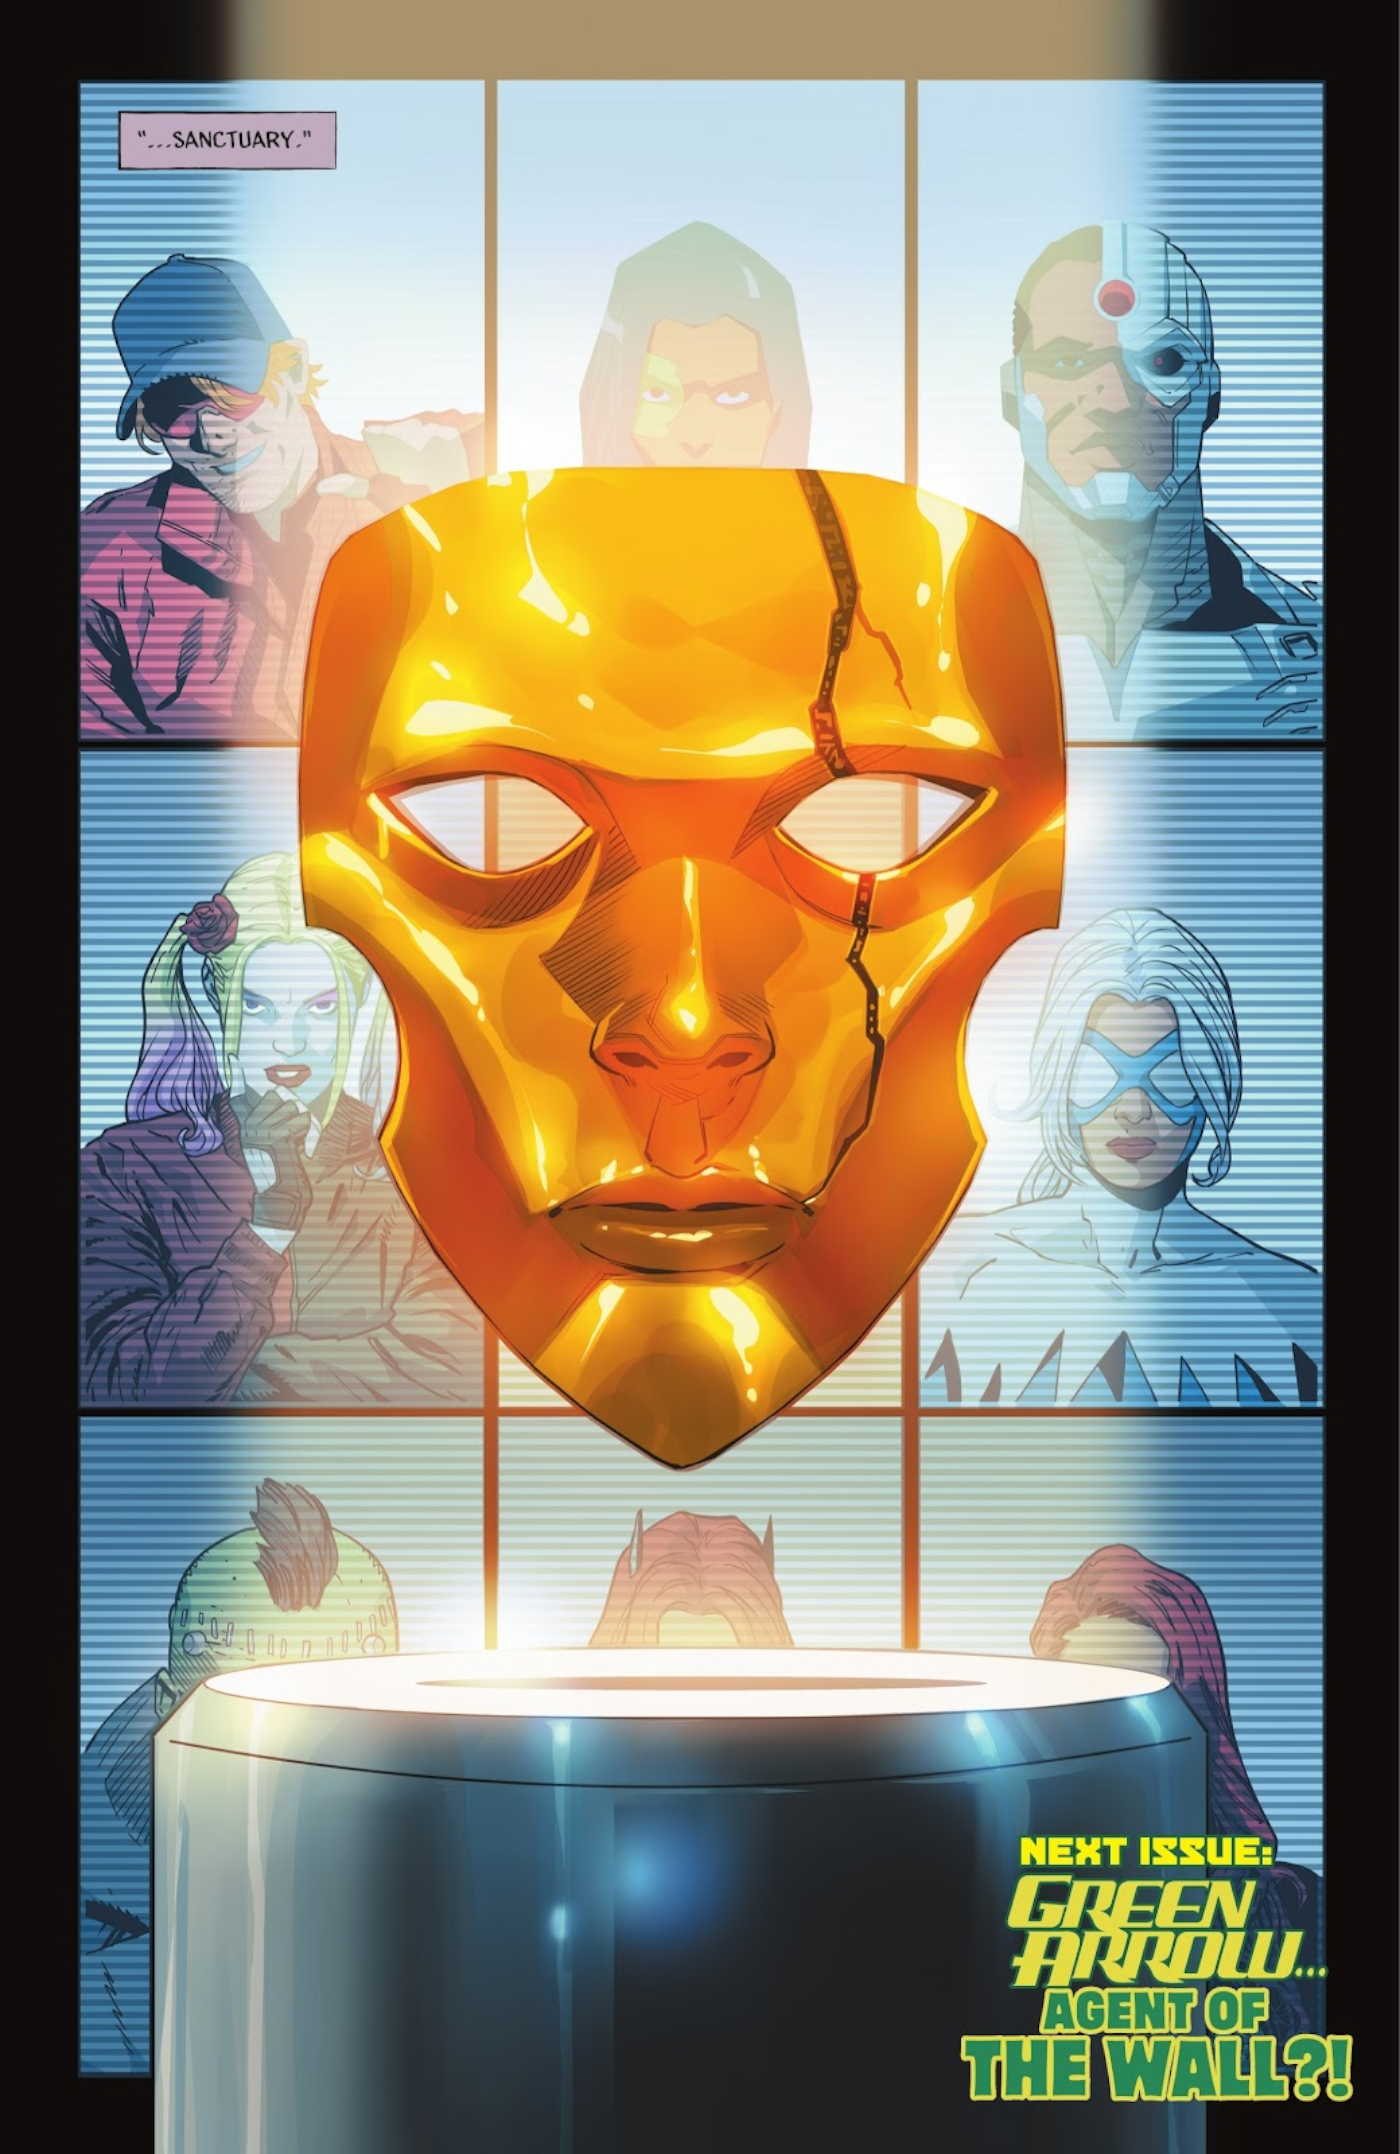 Comic book page: a gold mask floats in front of a screen featuring DC Comics heroes.